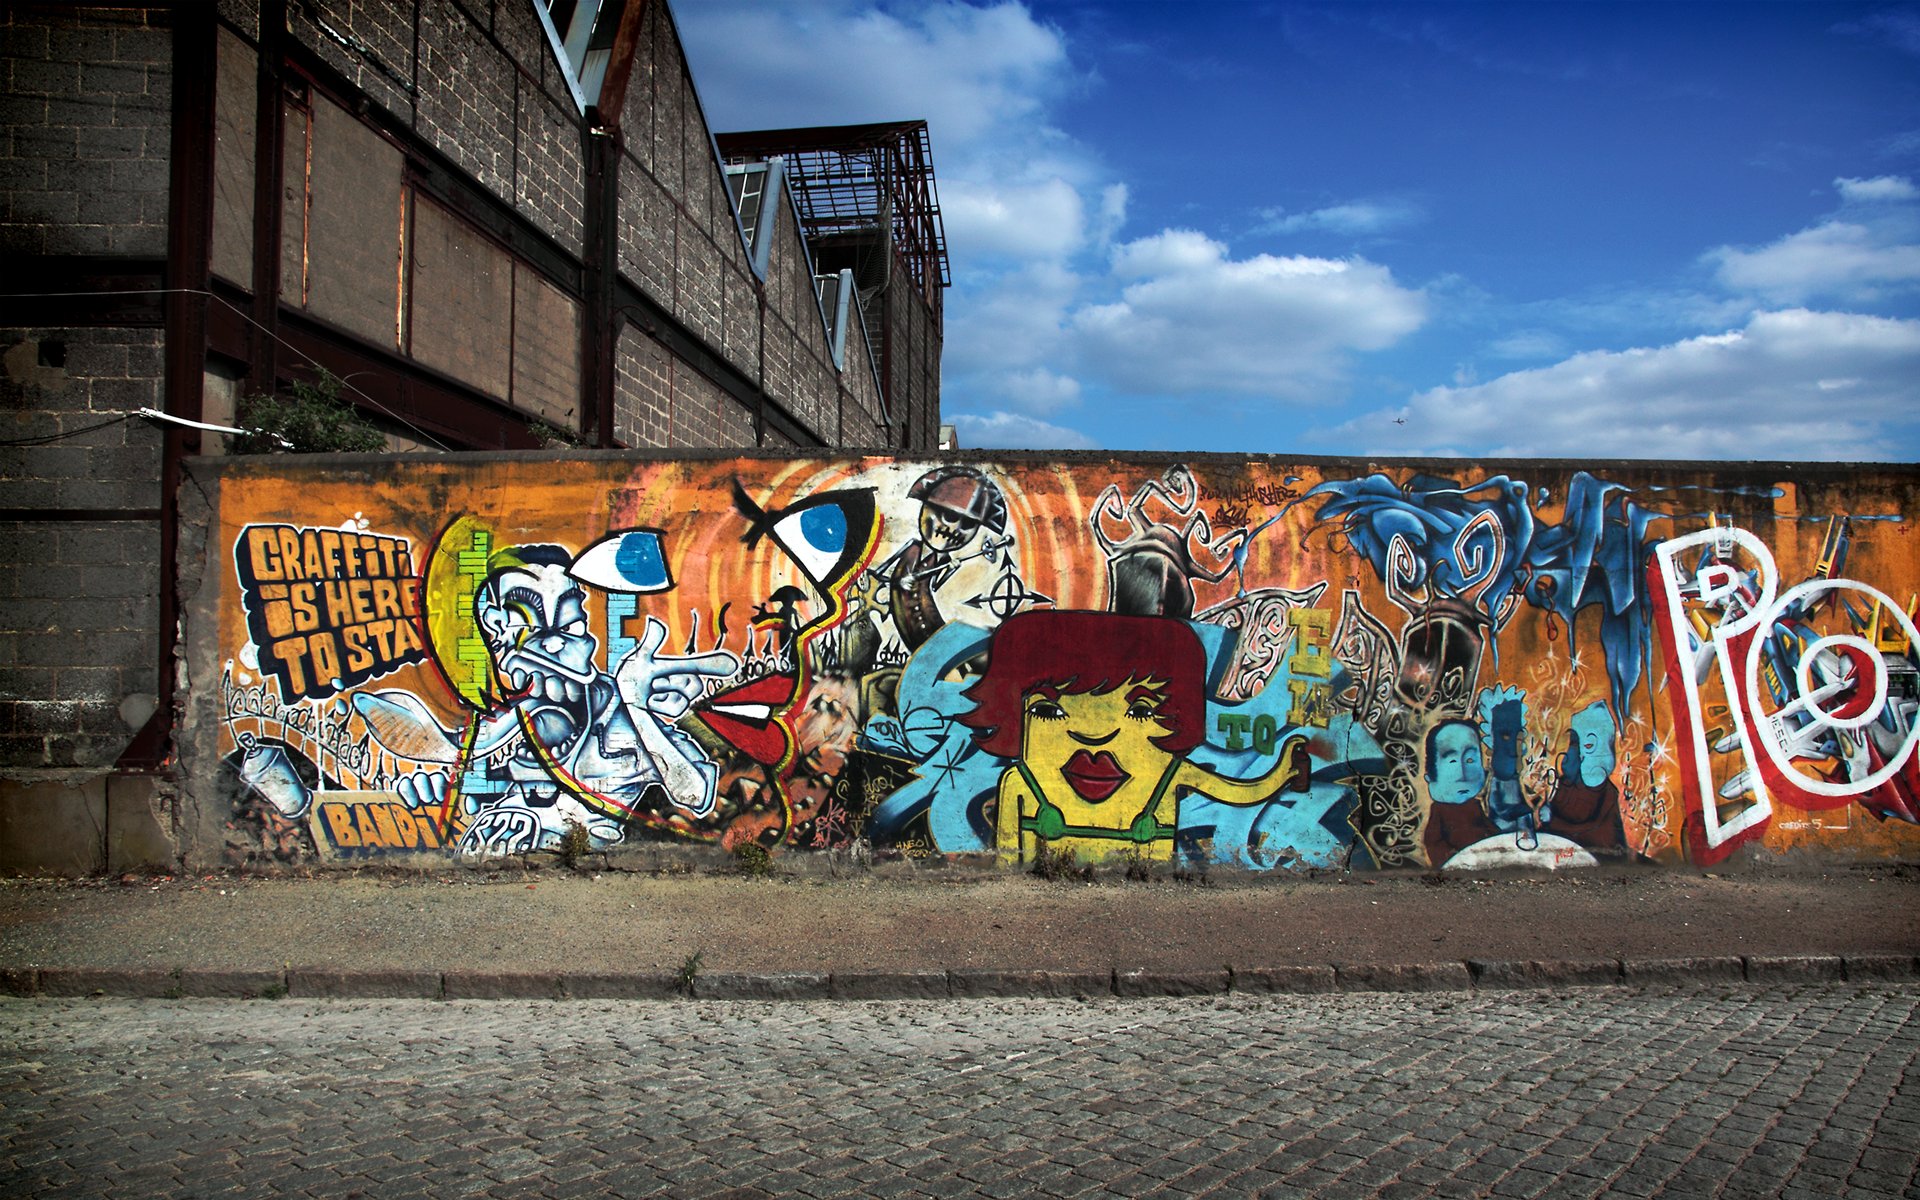 Graffiti wallpapers - Free A7 fonts HD Desktop background images pictures downloads